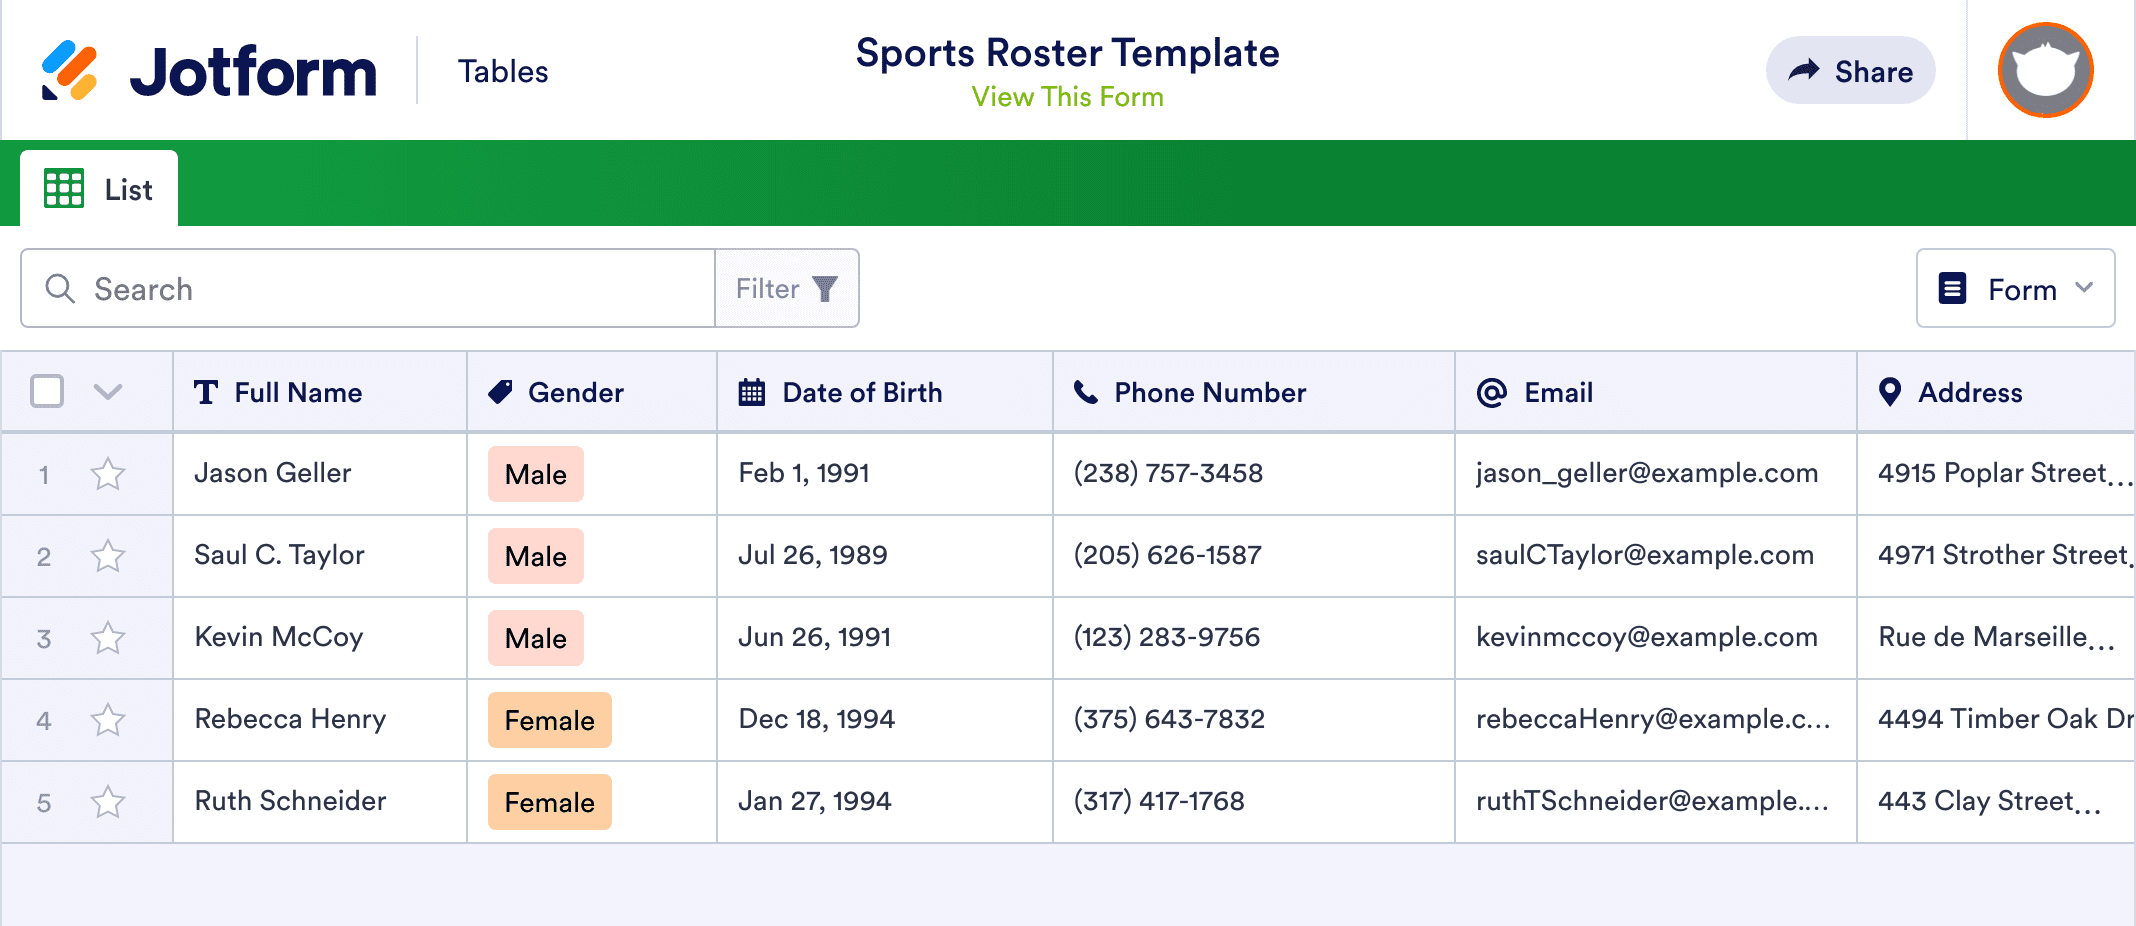 Sports Roster Template